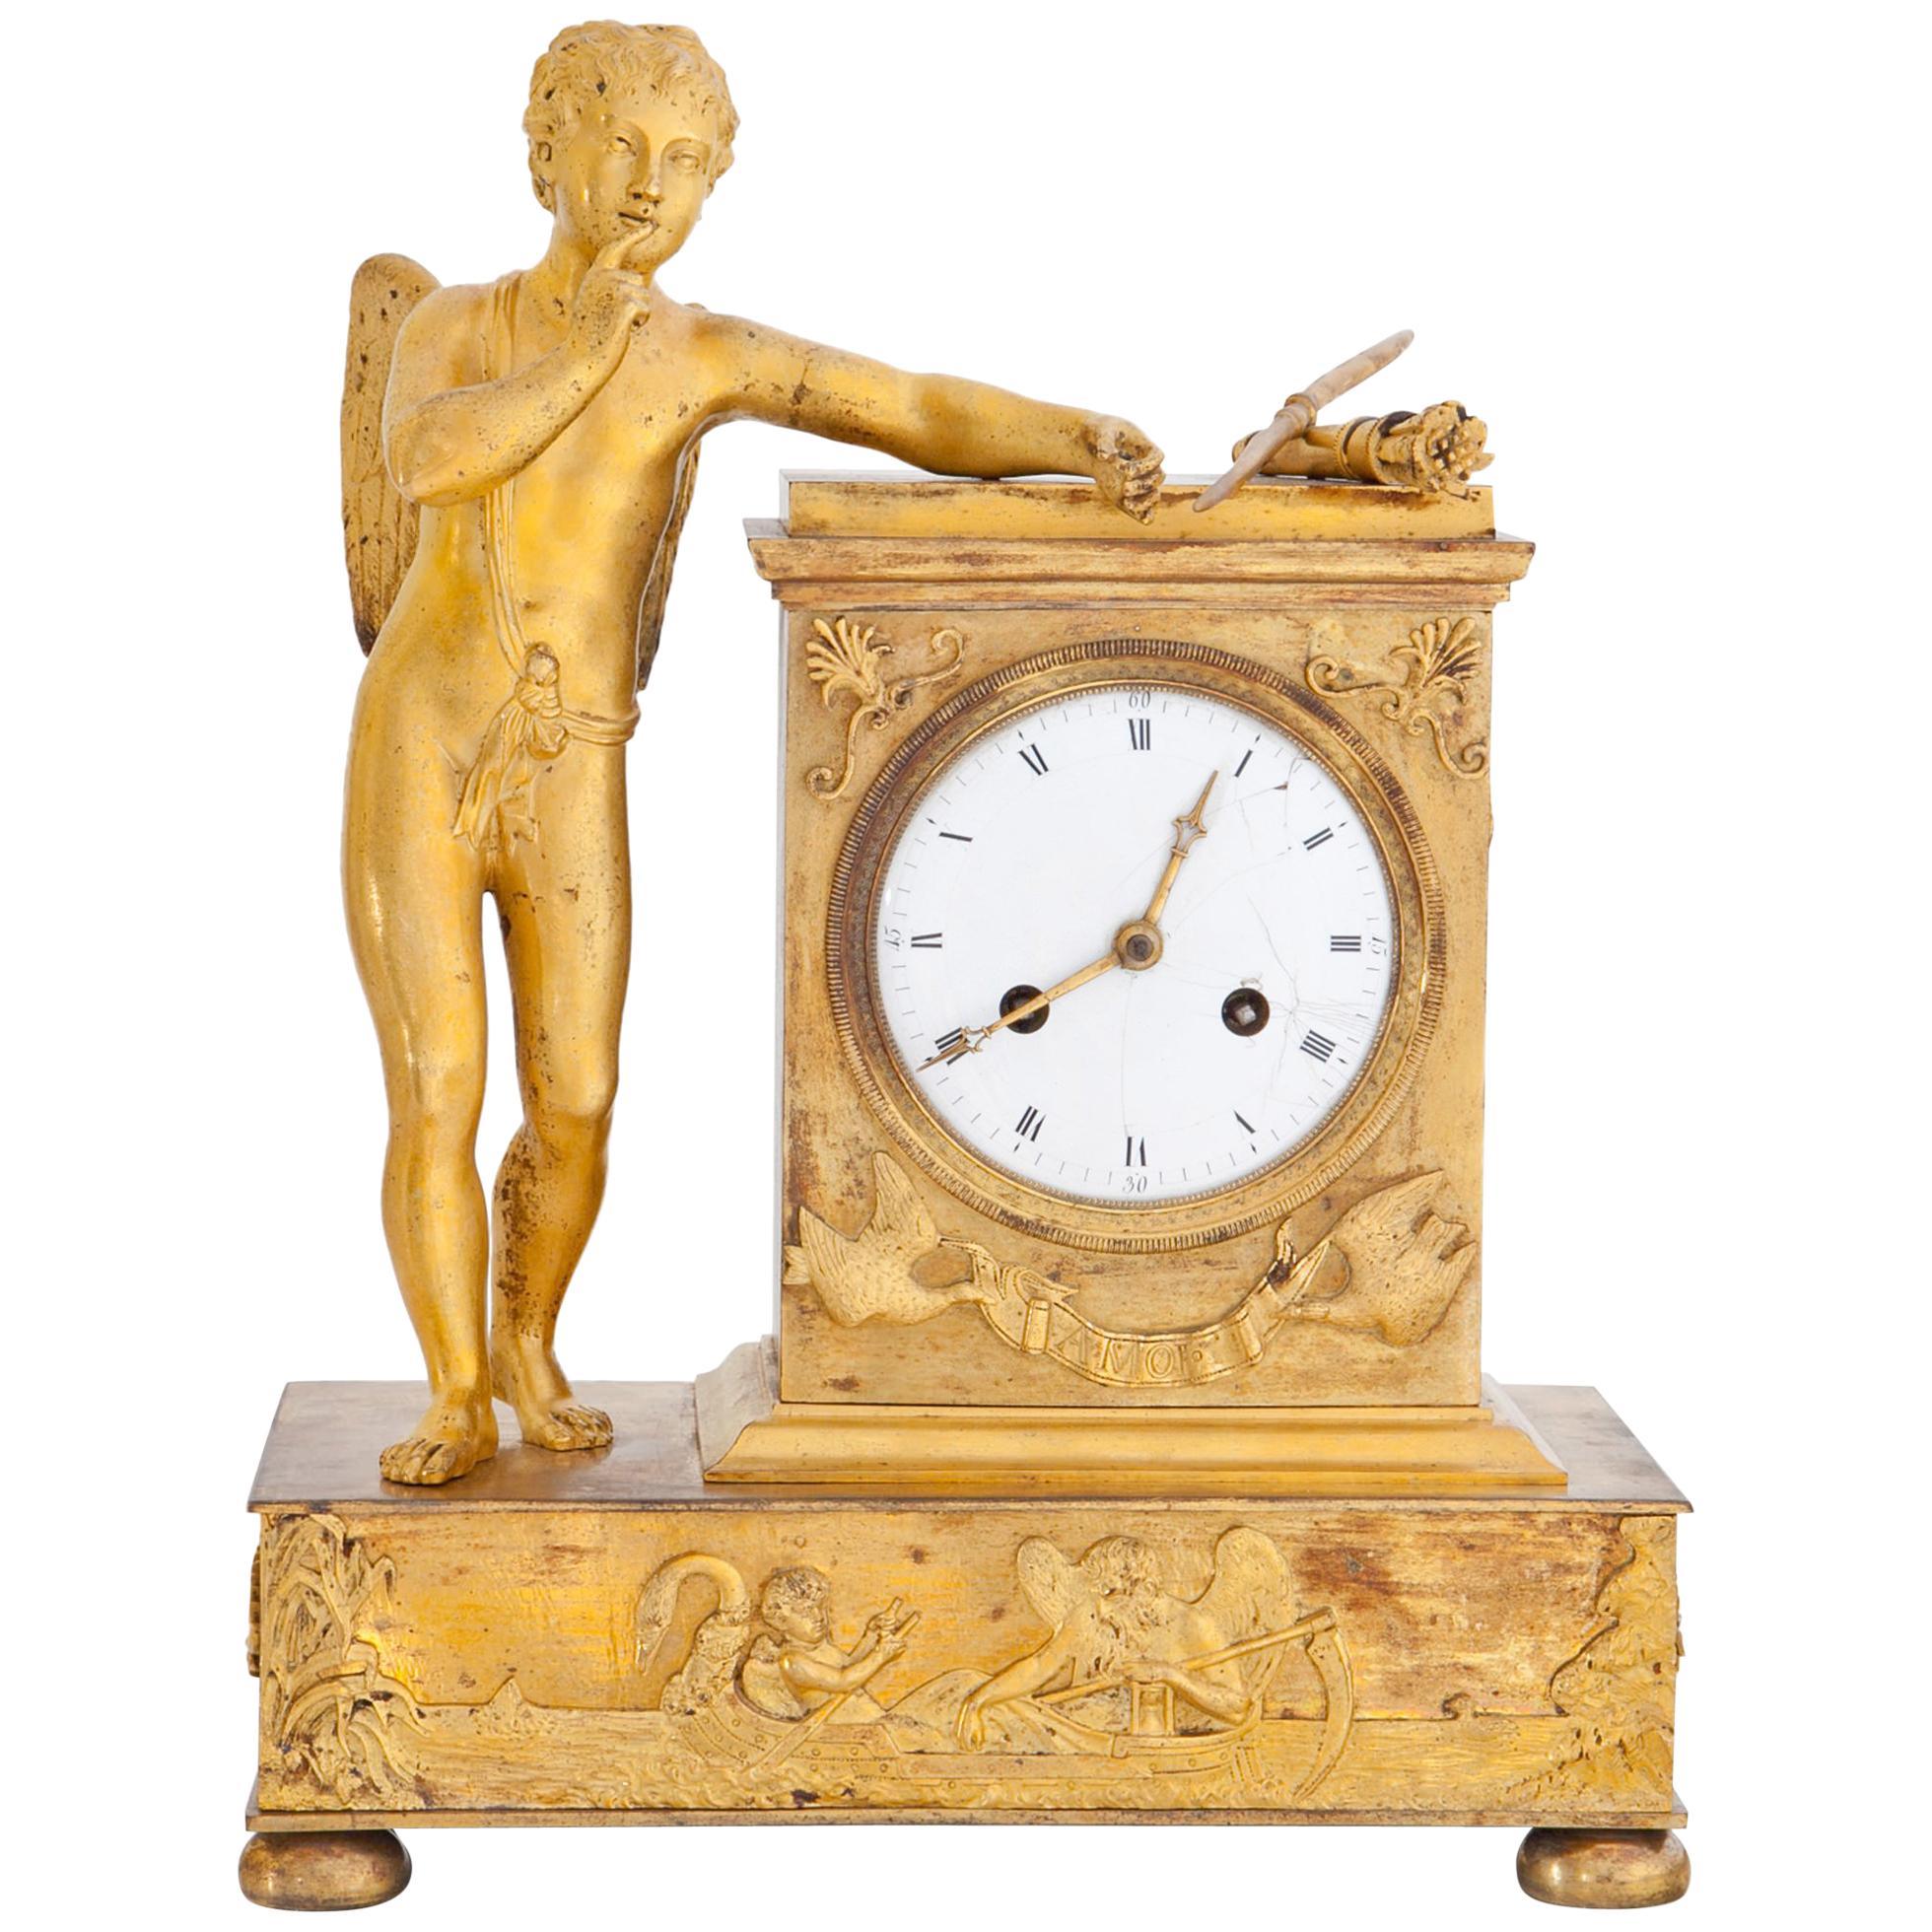 Empire Mantel Clock with Cupid, France, First Quarter of the 19th Century